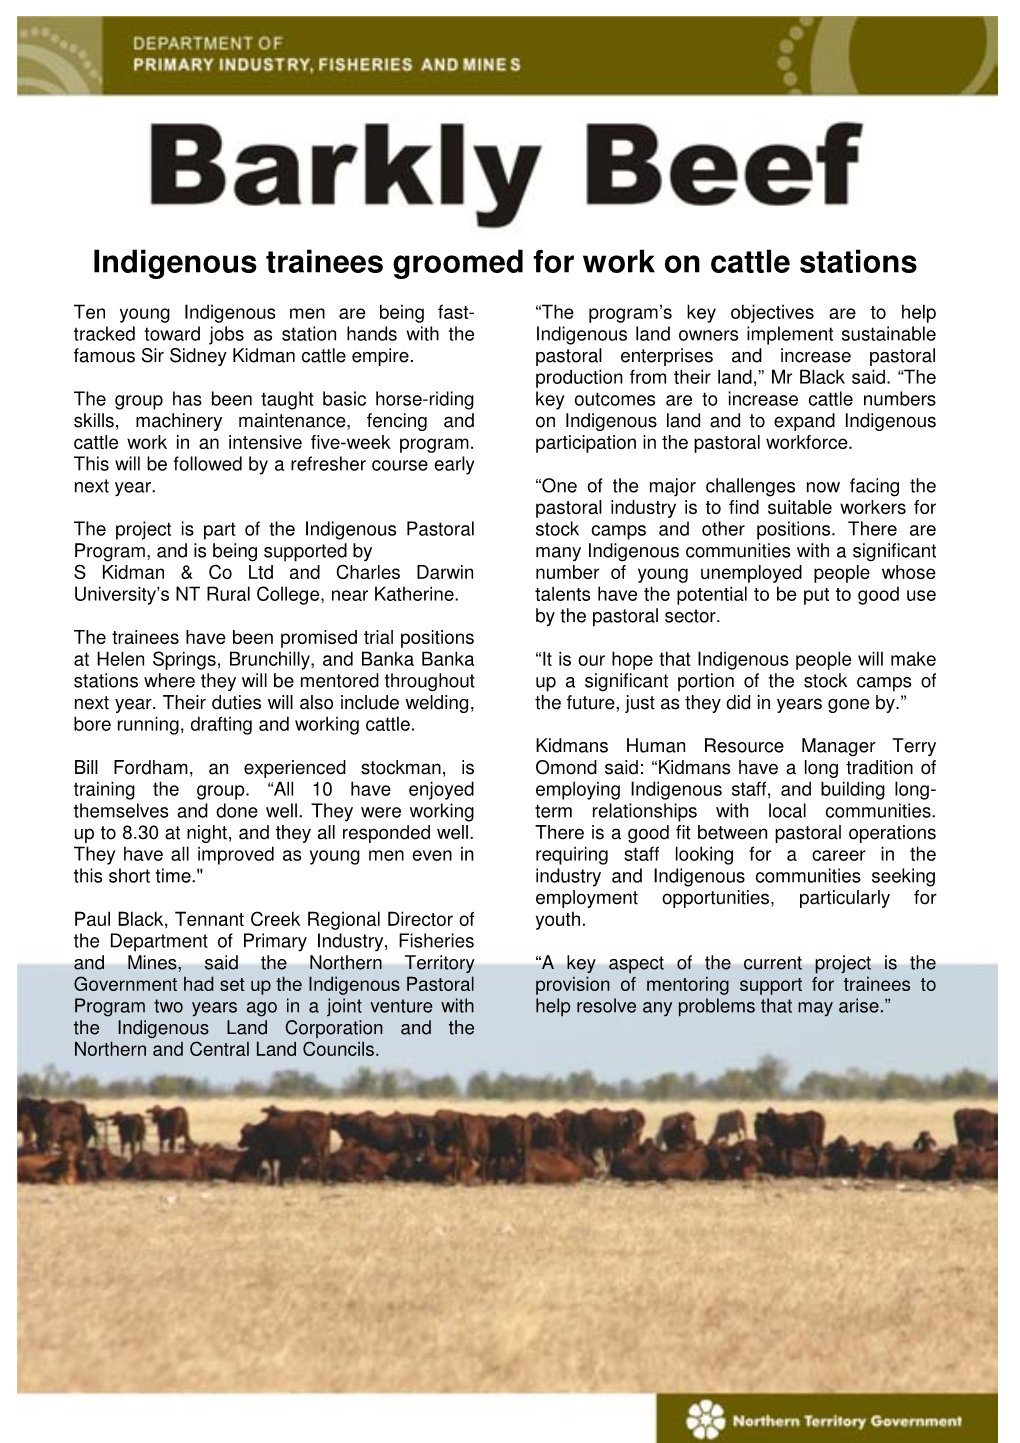 Indigenous Trainees Groomed for Work on Cattle Stations